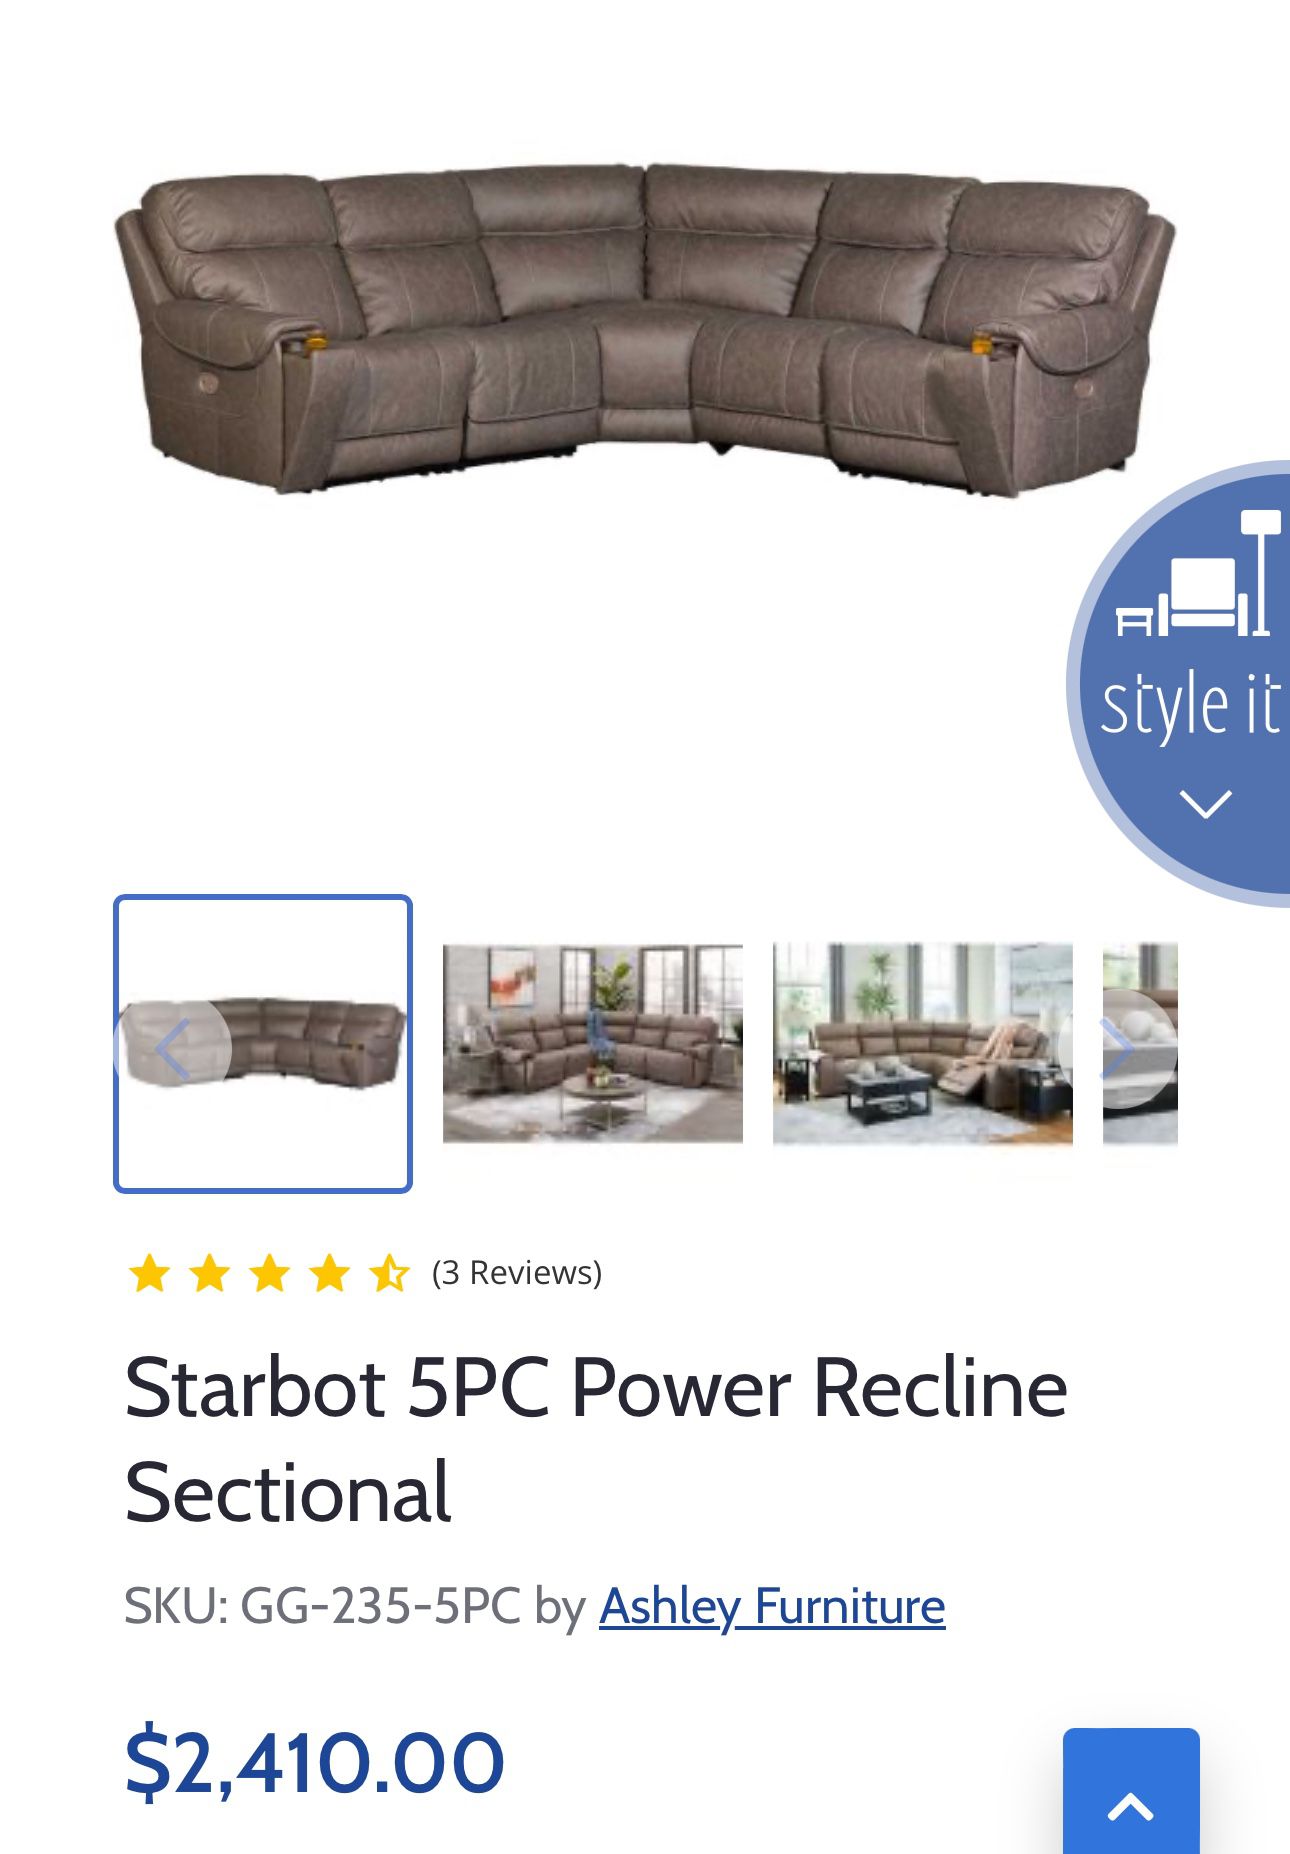 Starbot 5PC Power Recline Sectional